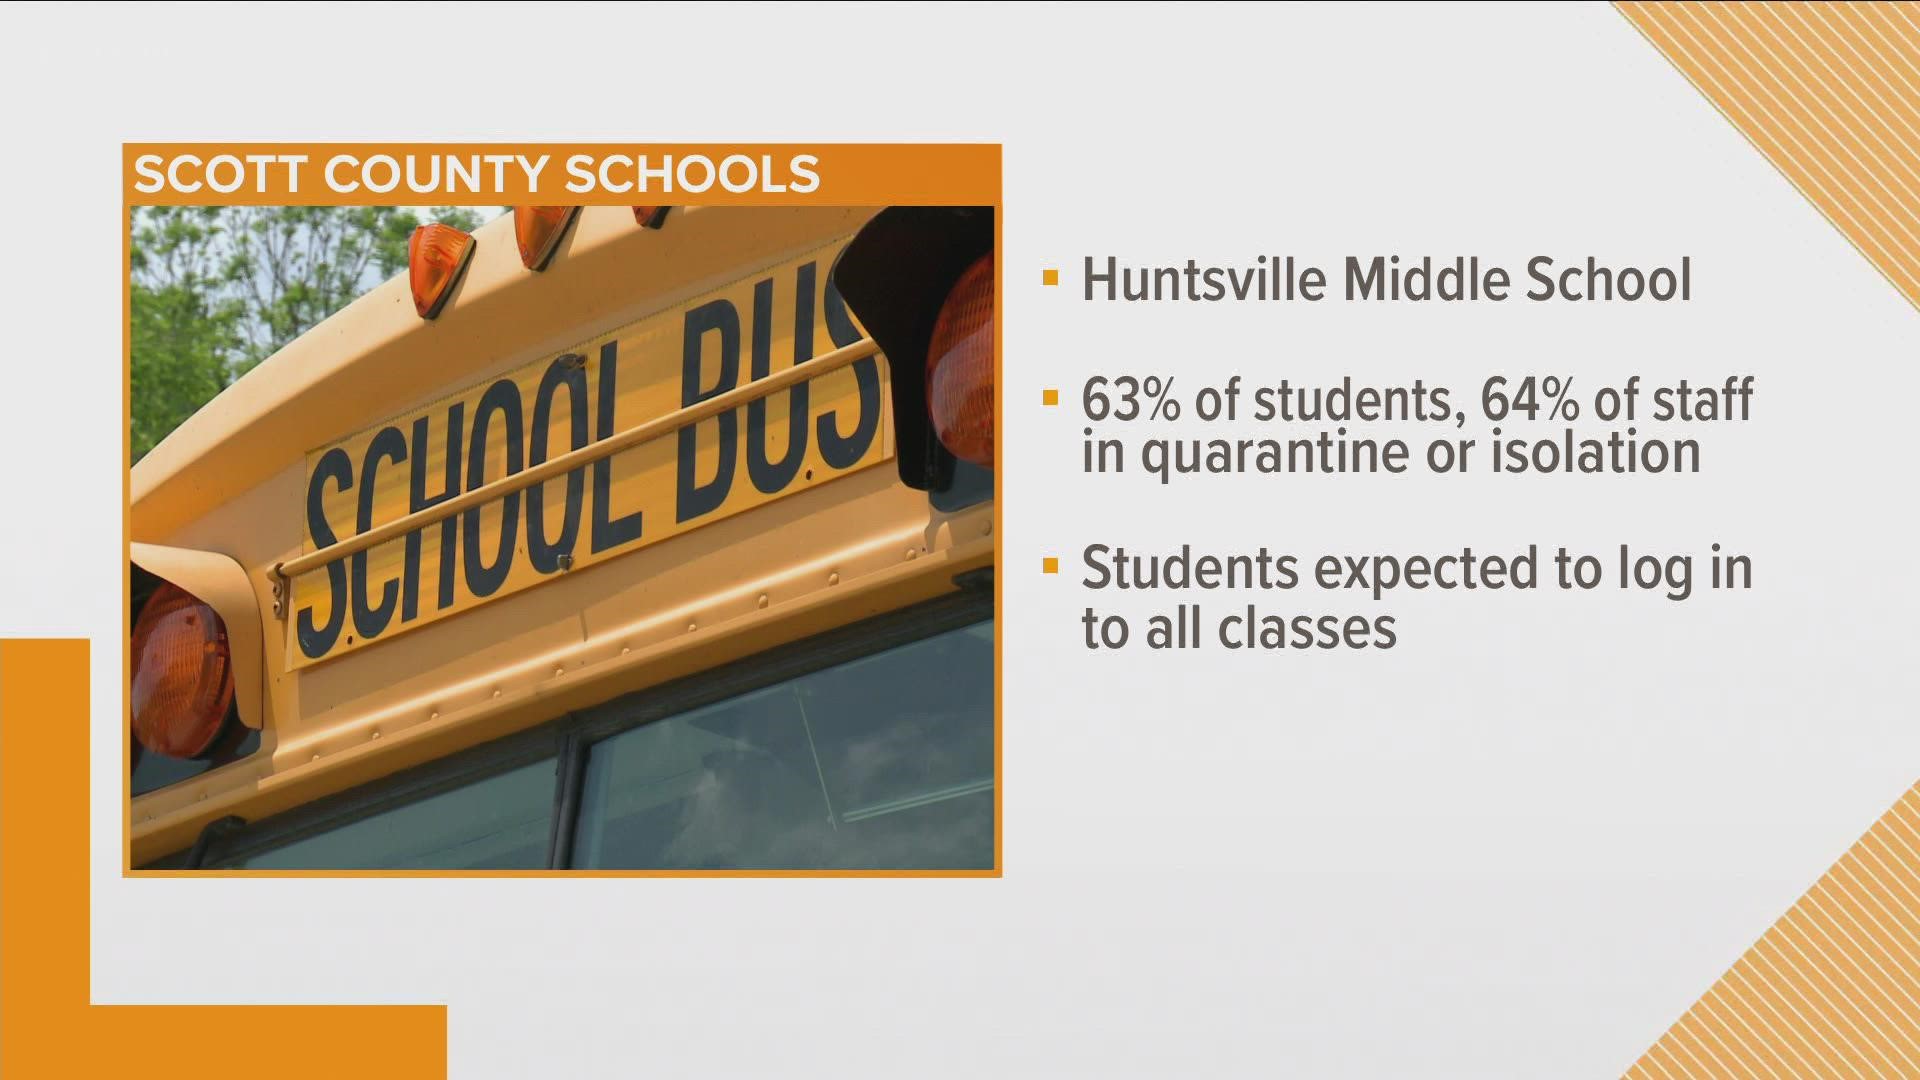 Grades 5 through 8 at Huntsville Middle School will join three other's on a virtual schedule this week.